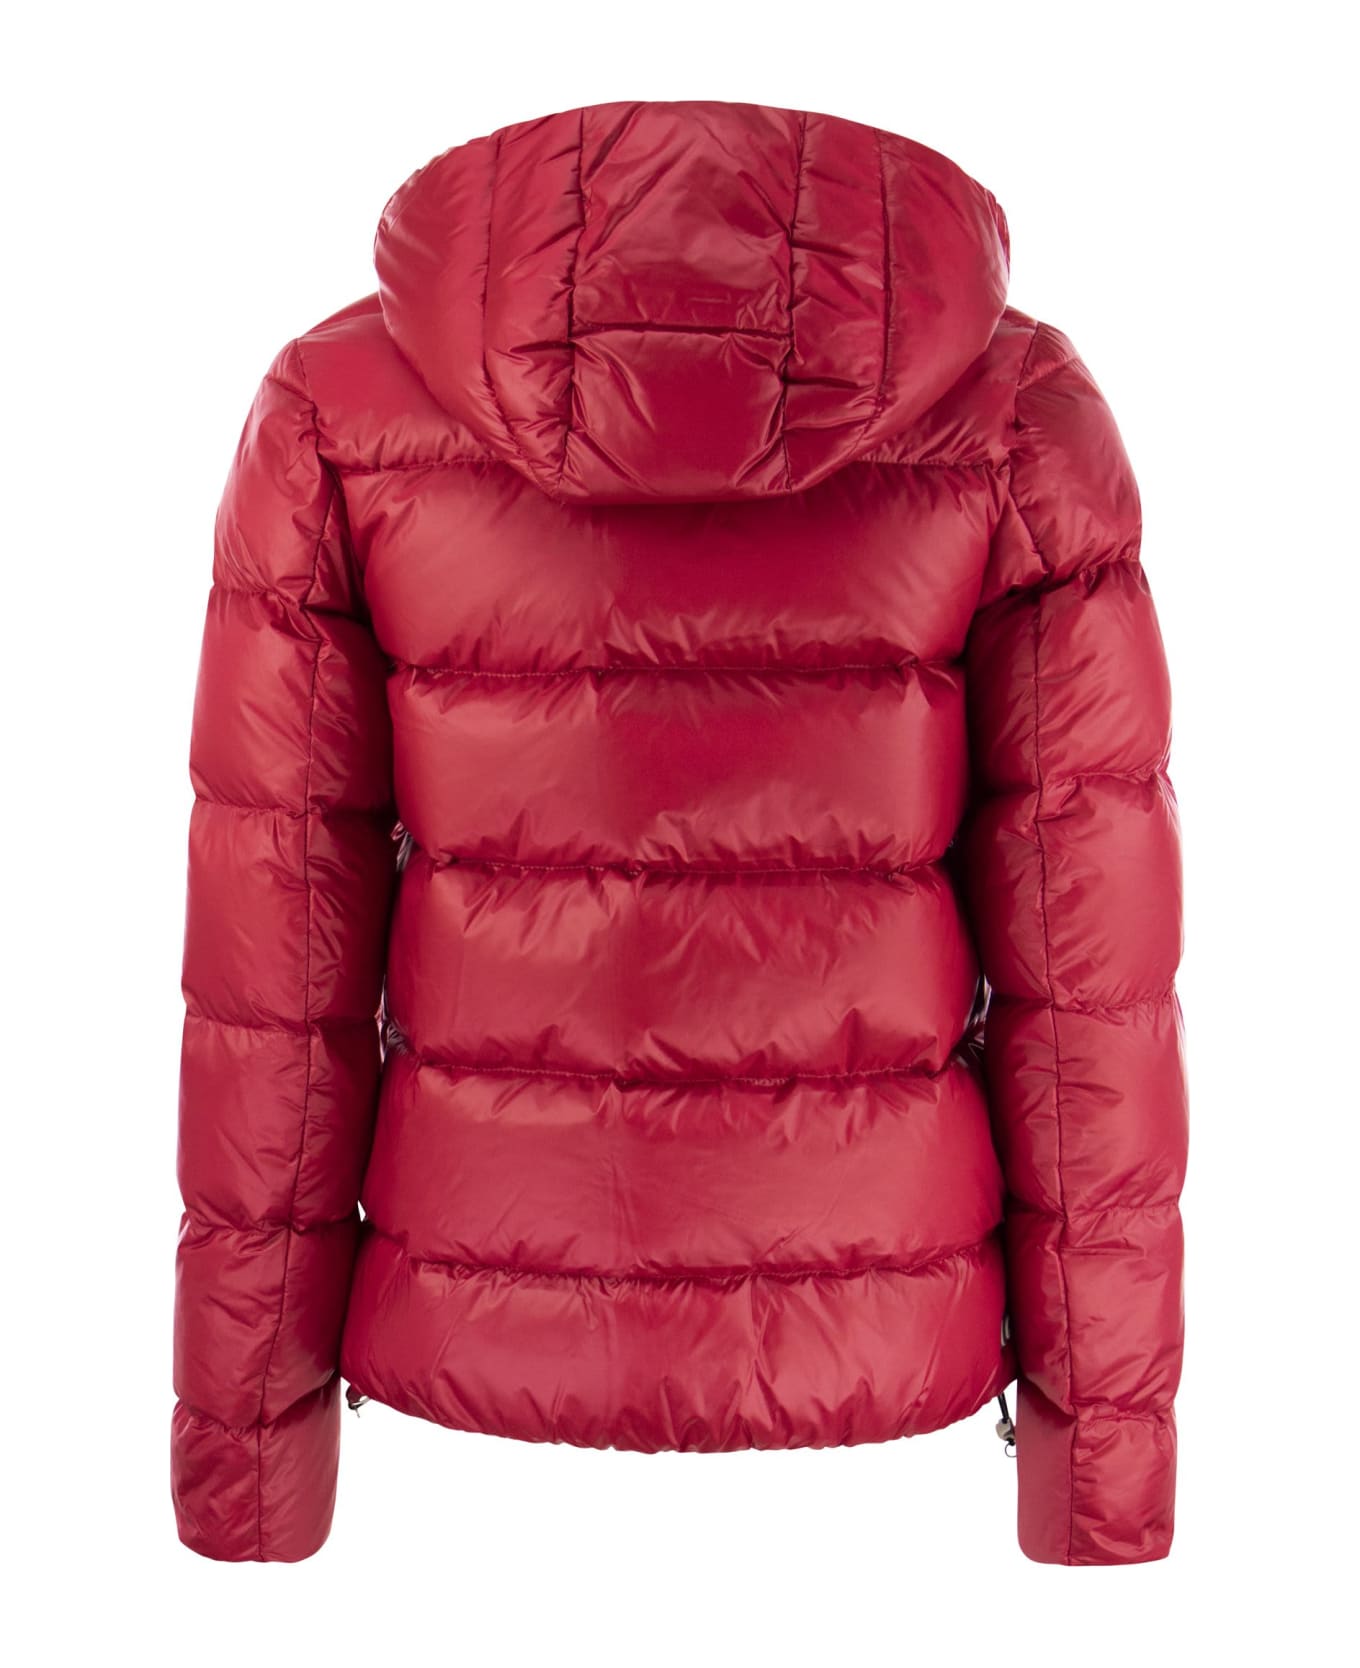 Colmar Down Jacket With Detachable Hood - Red